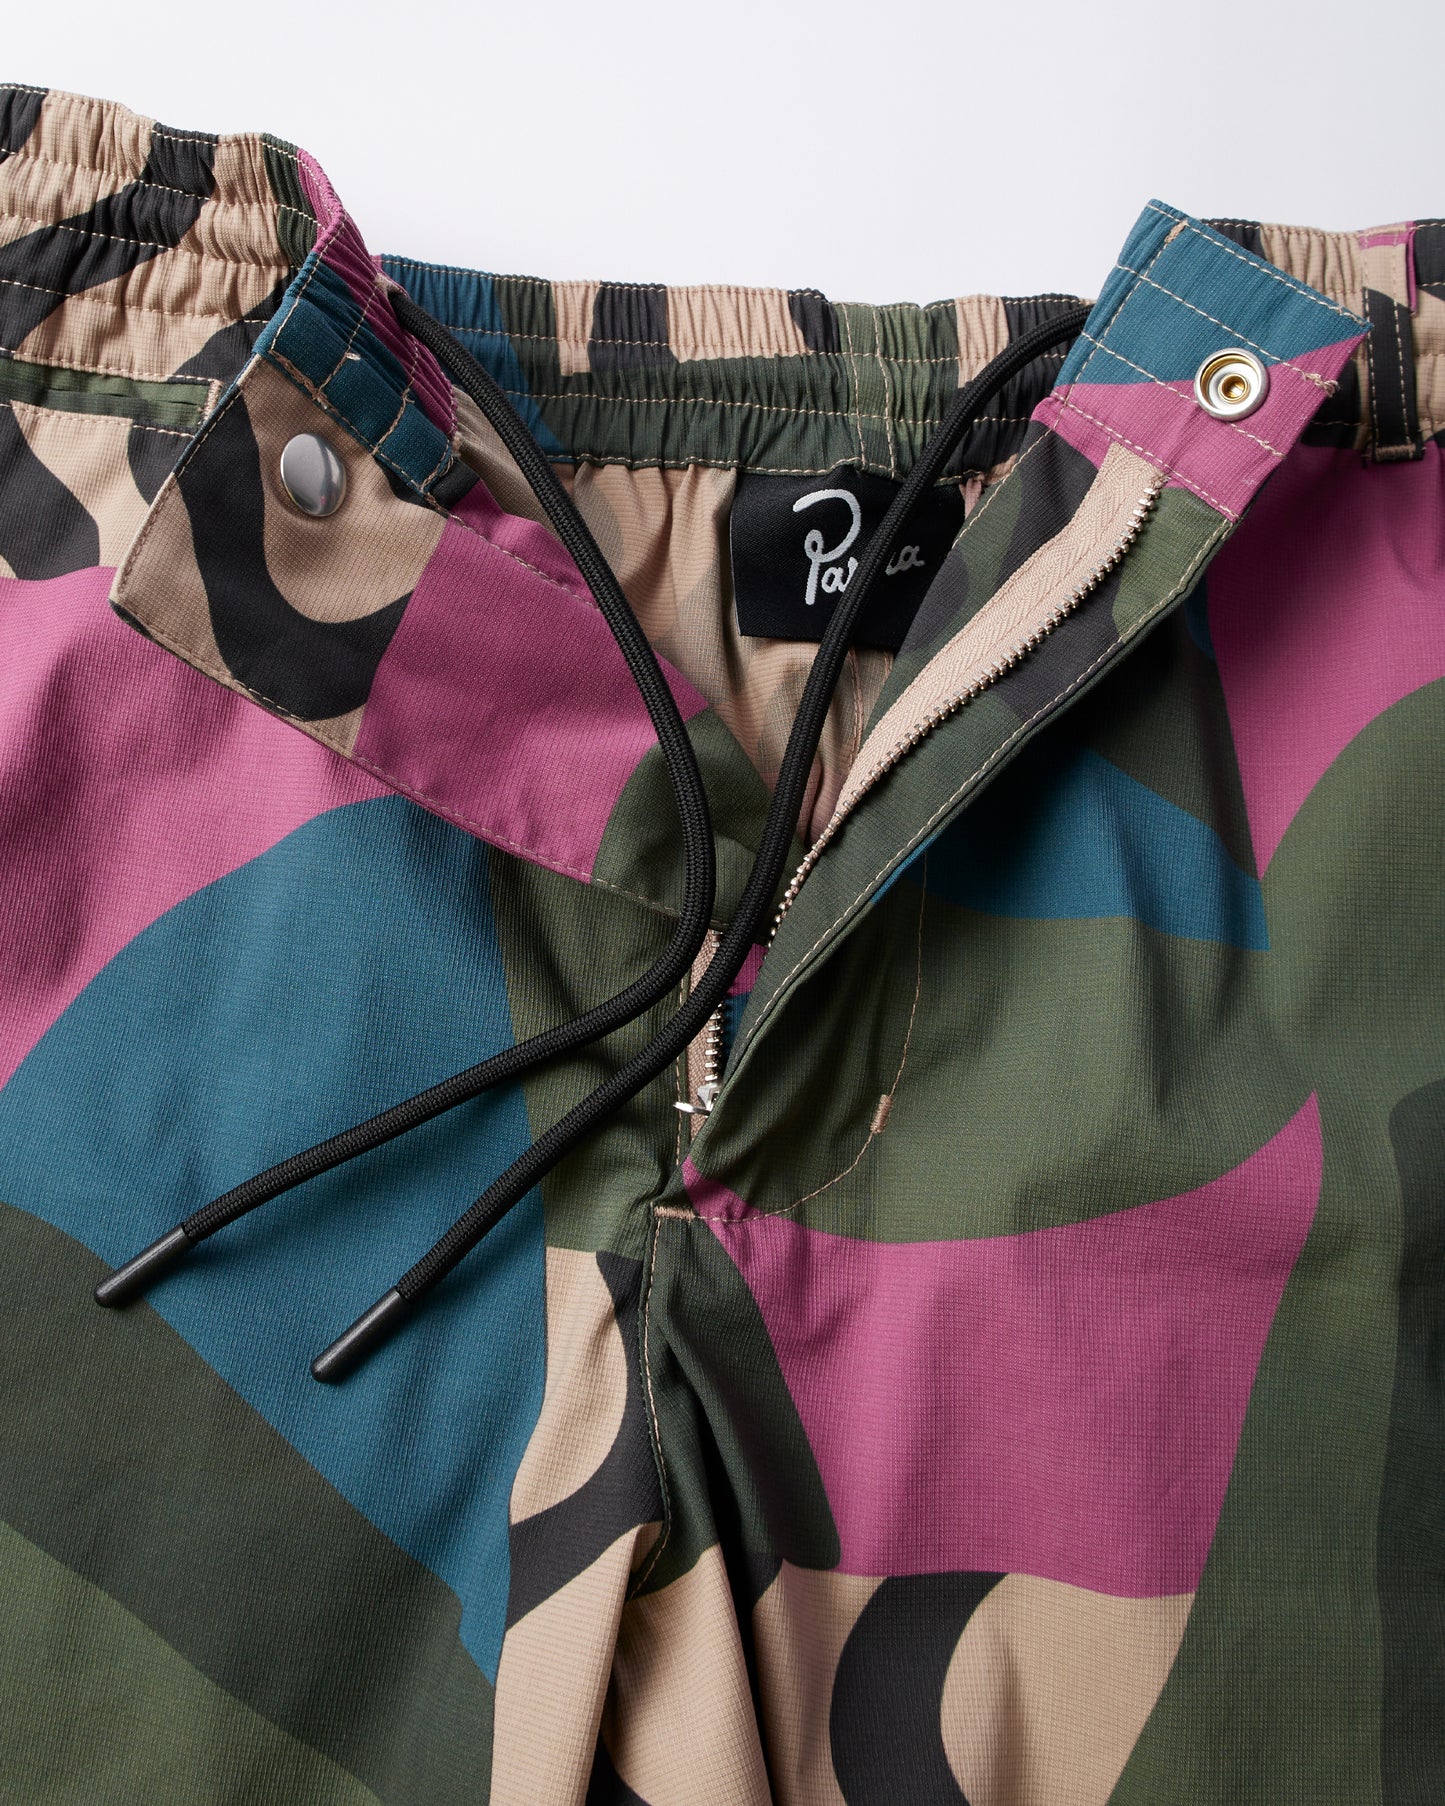 Distorted Camo Shorts (Pink)